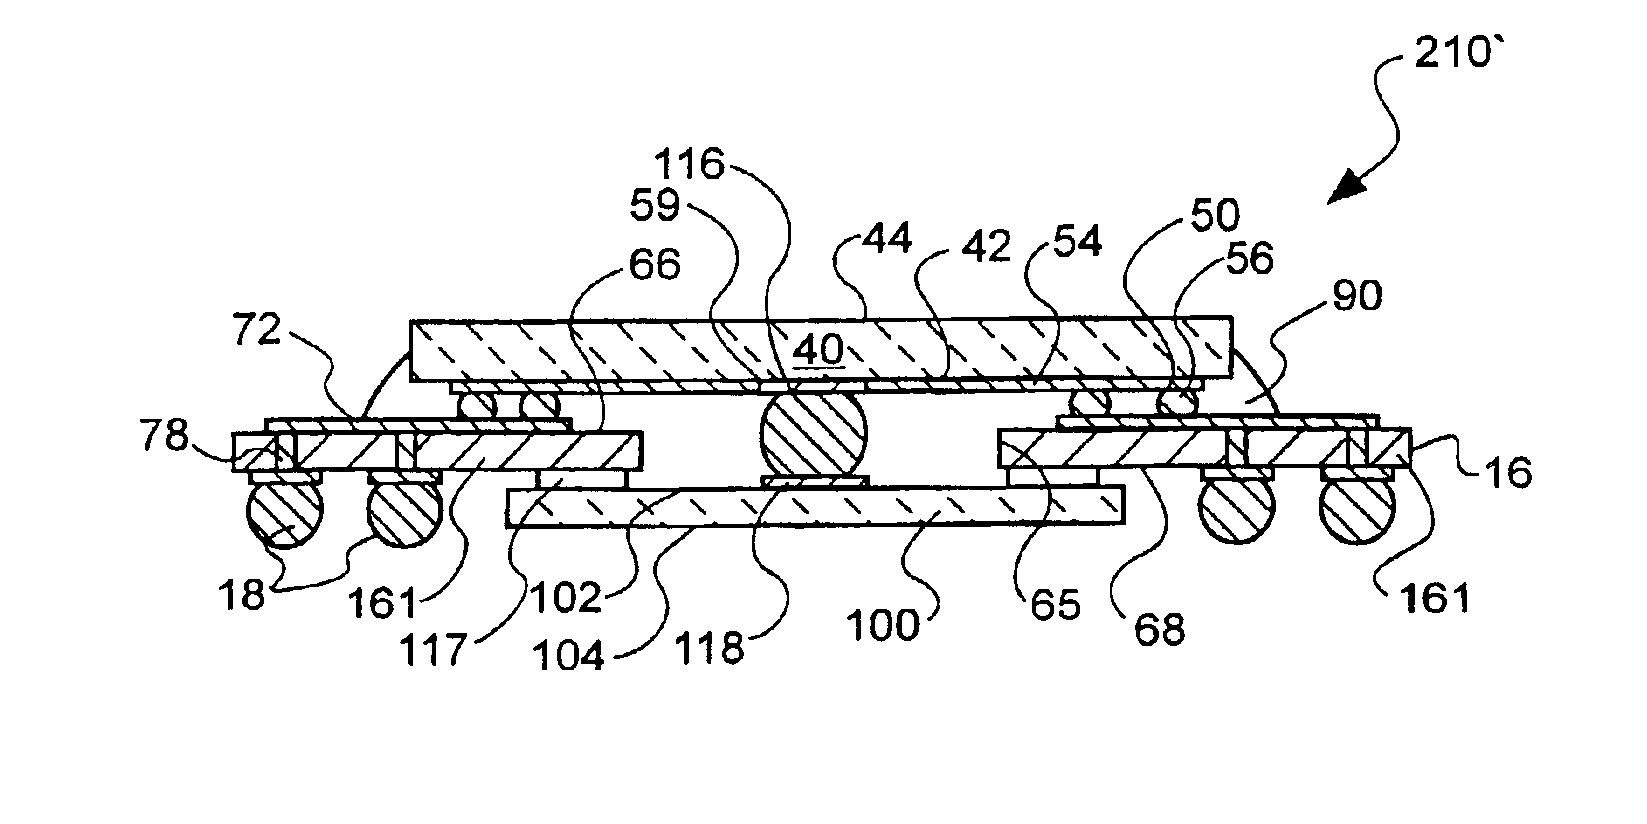 Semiconductor device assemblies and packages including multiple semiconductor devices and methods